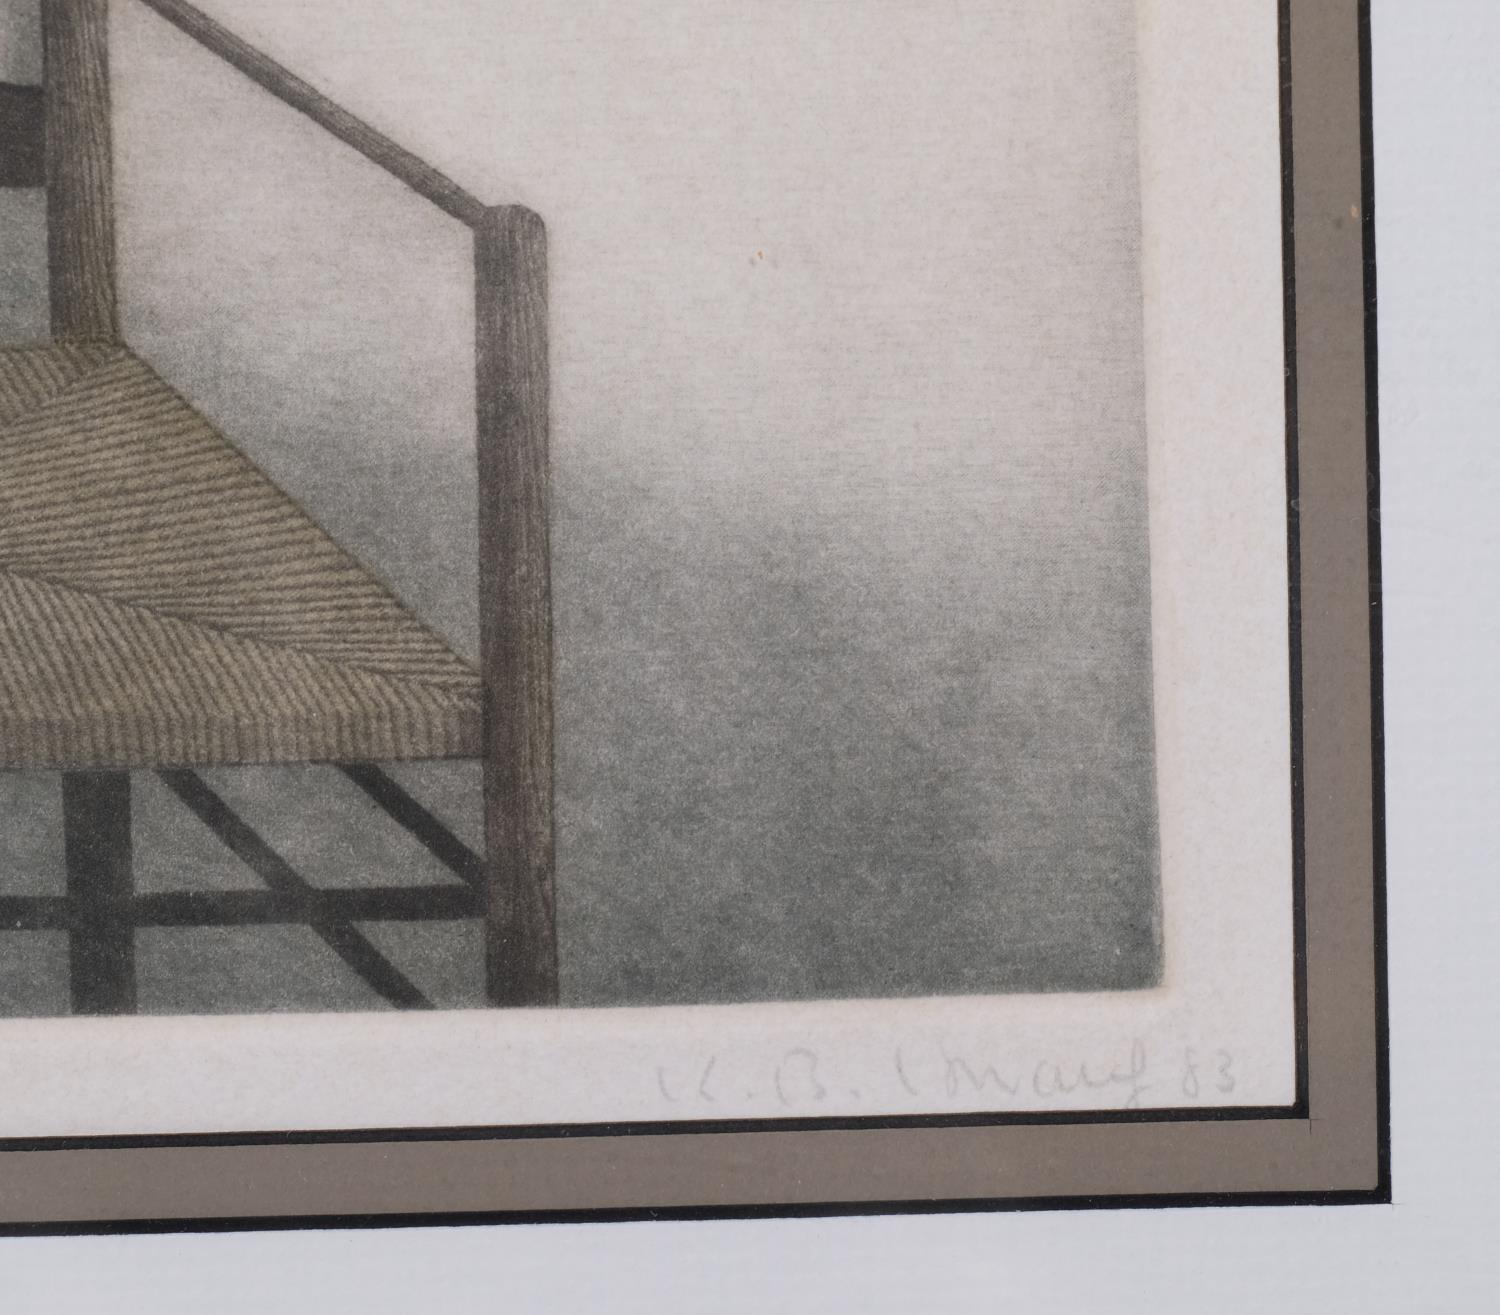 Kyu-Baik Hwang (born 1932), Two Chairs, coloured etching, artist's proof, signed in pencil, plate - Image 3 of 4